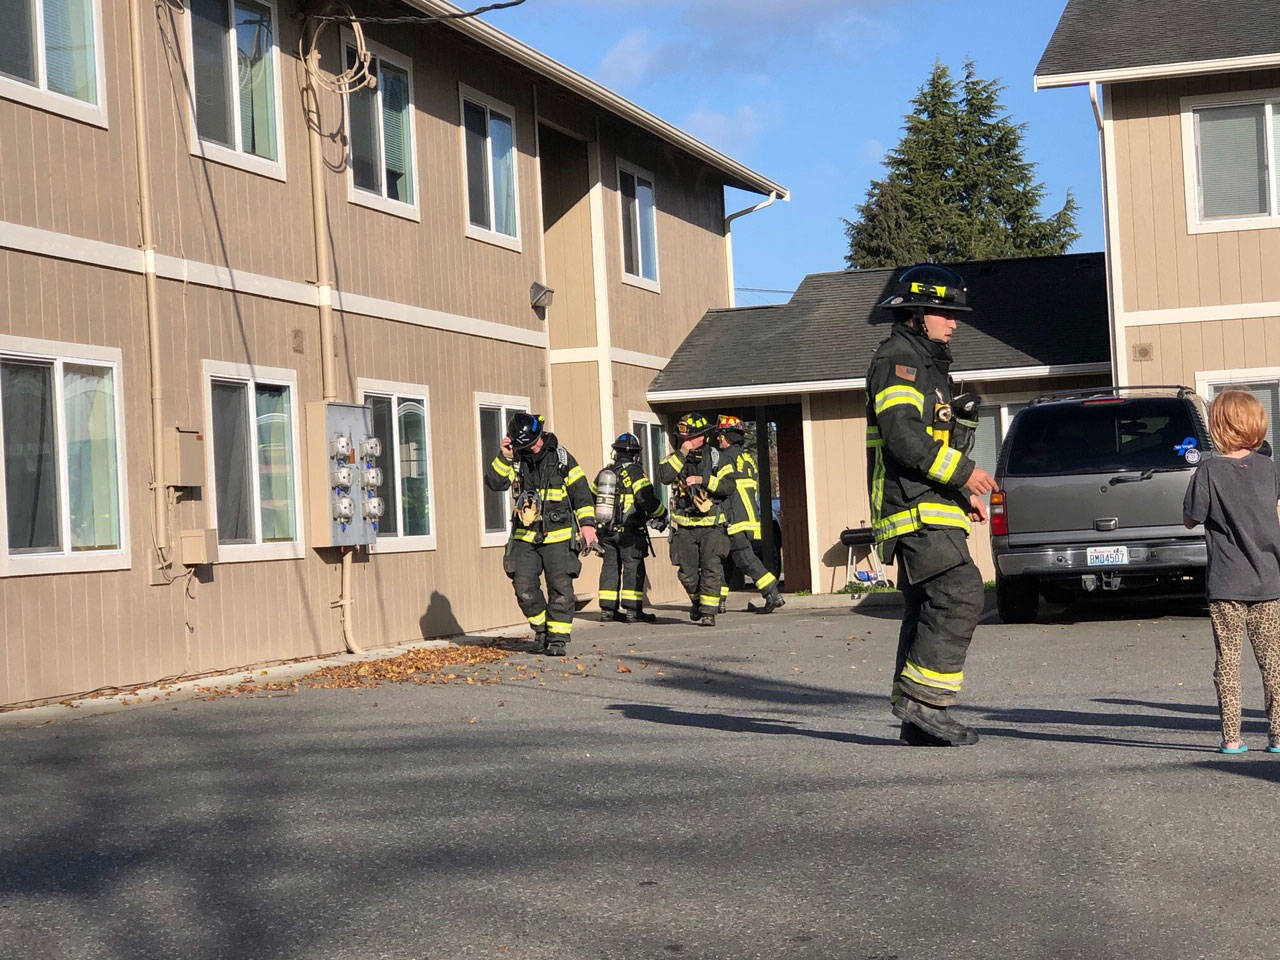 Port Angeles firefighters respond to a reported structure fire Sunday. (Port Angeles Fire Department)